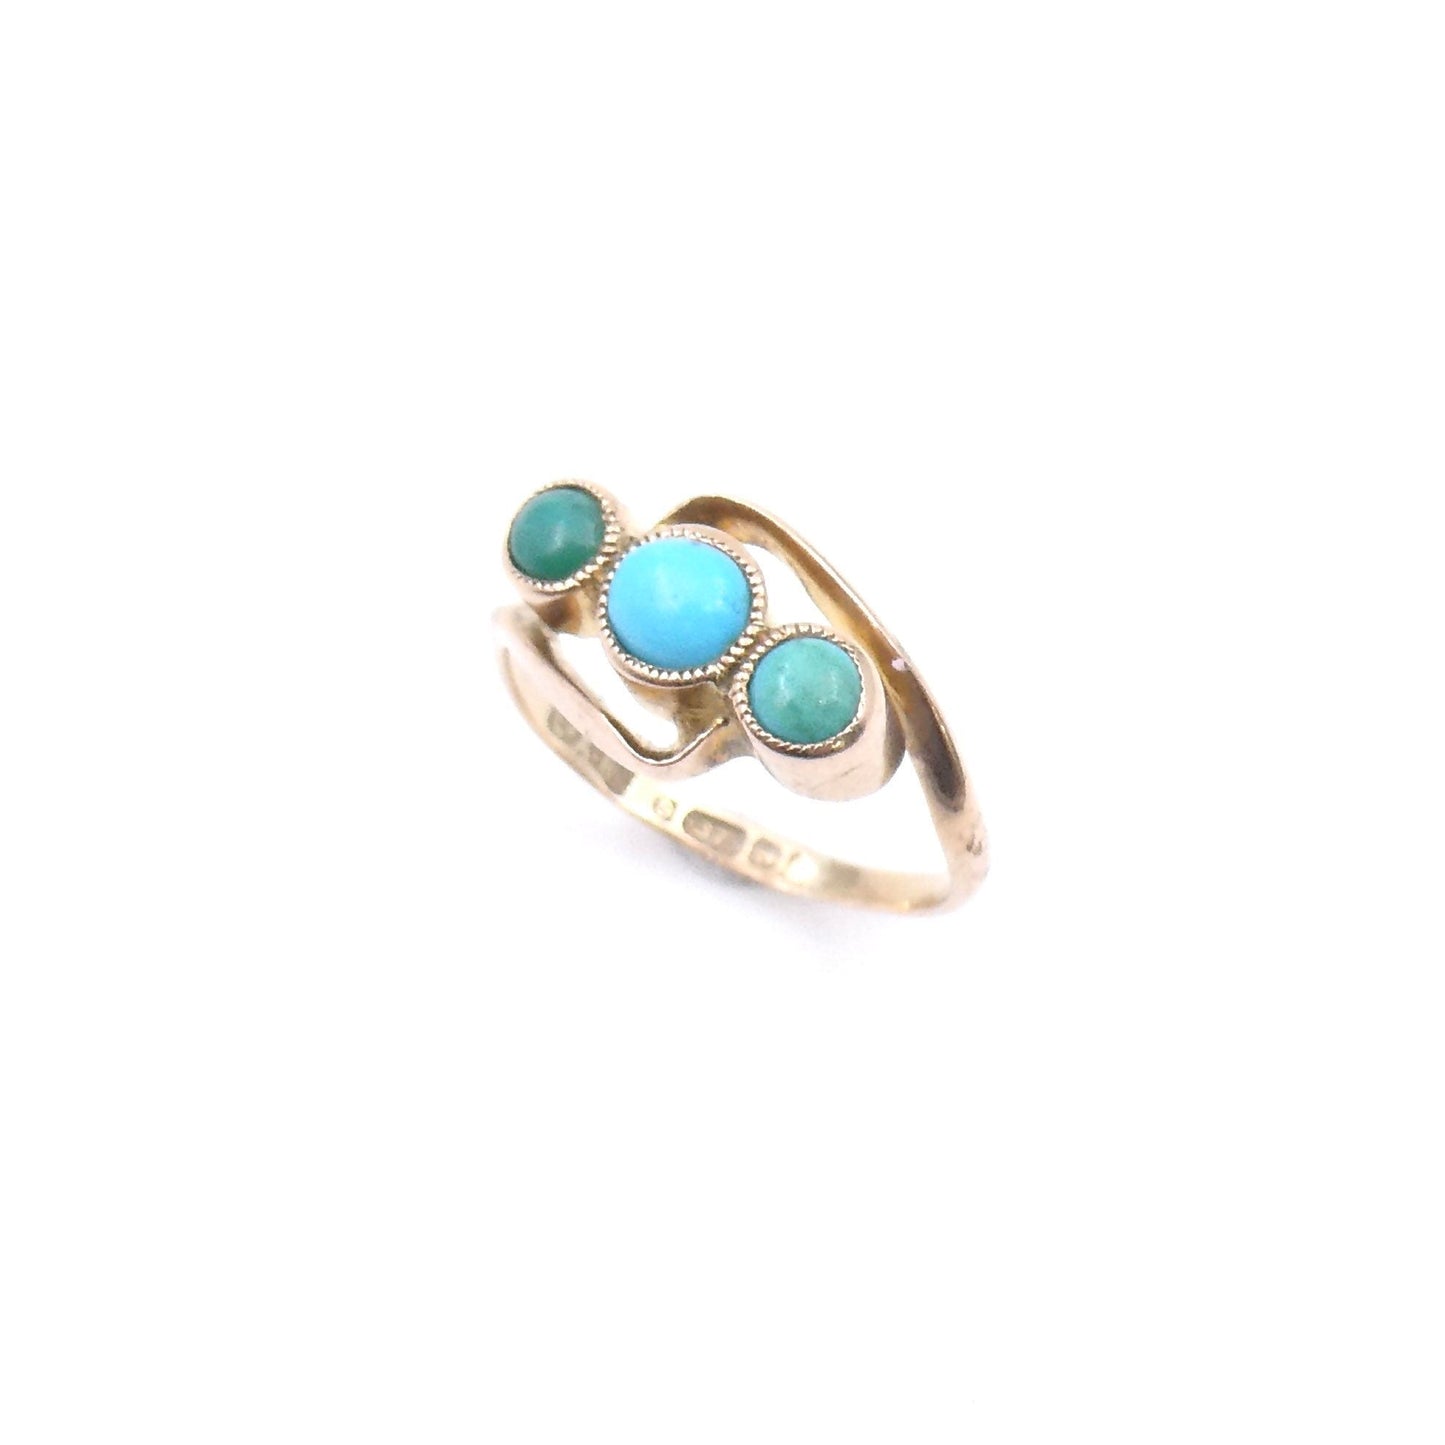 Three stone turquoise ring with a rose tone to the gold and a twist design, very small baby finger ring. - Collected